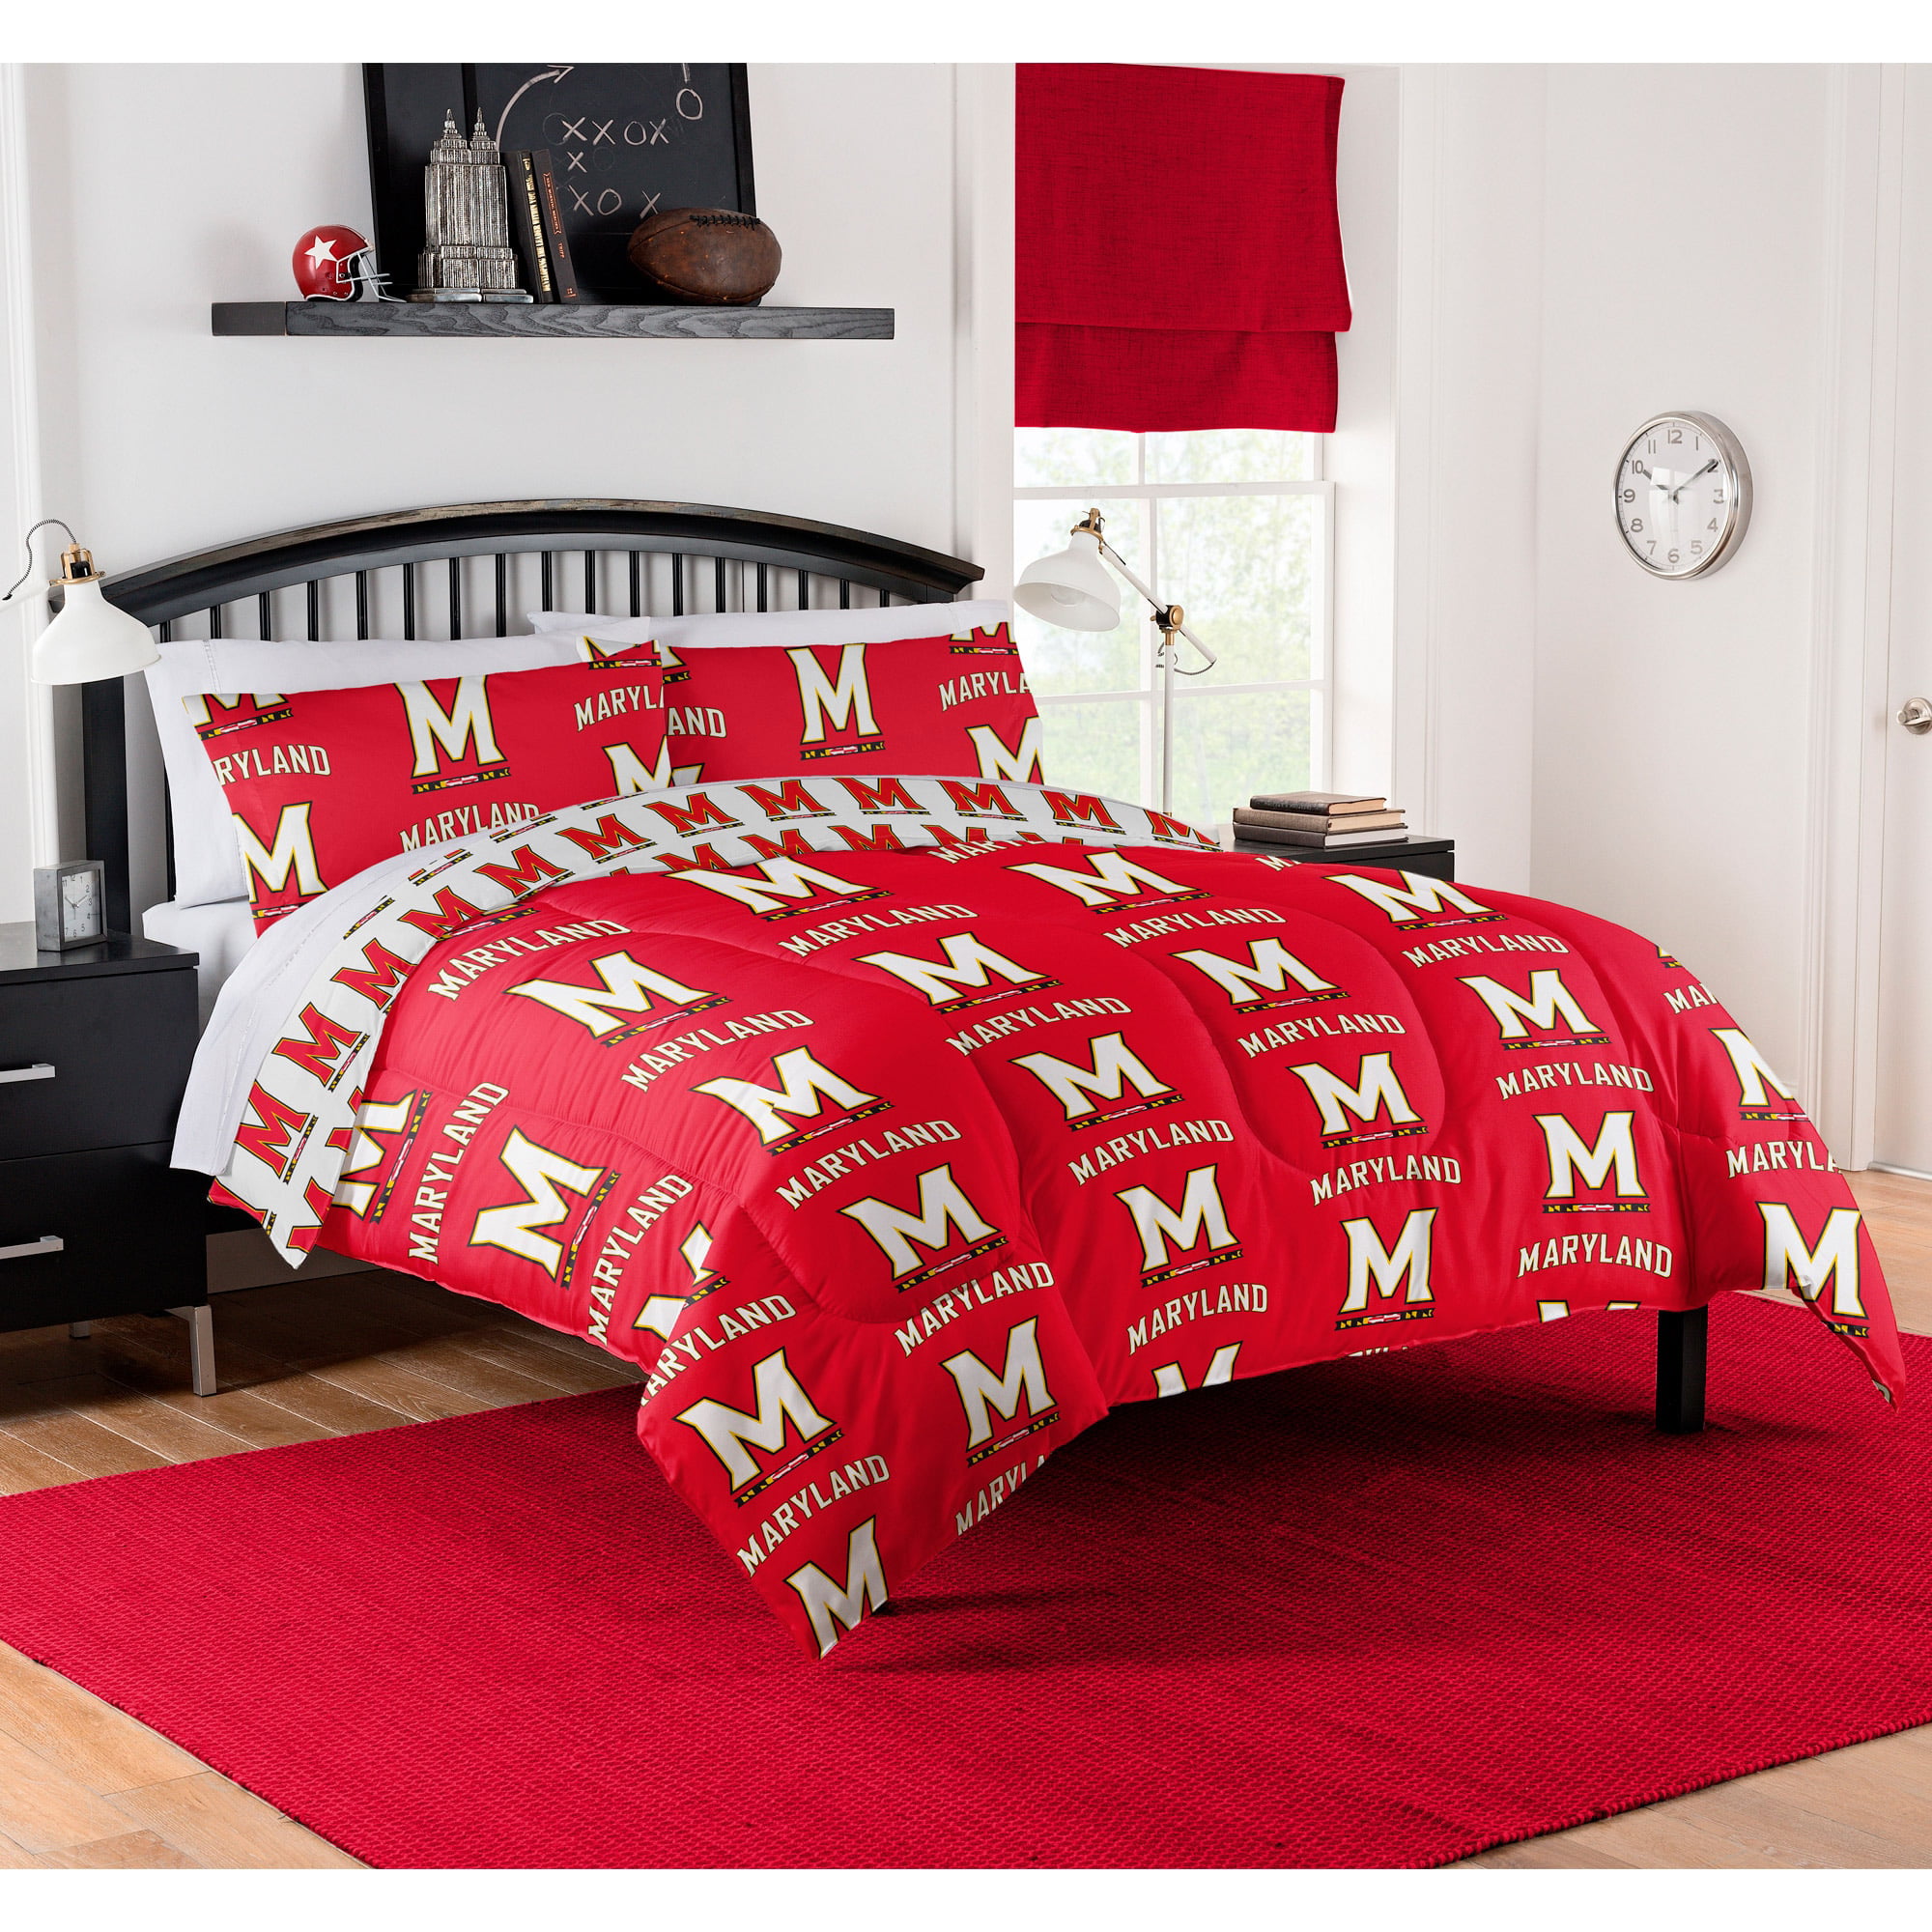 NCAA Ohio State Buckeyes Bed in Bag Set, Full Size, Team Colors 